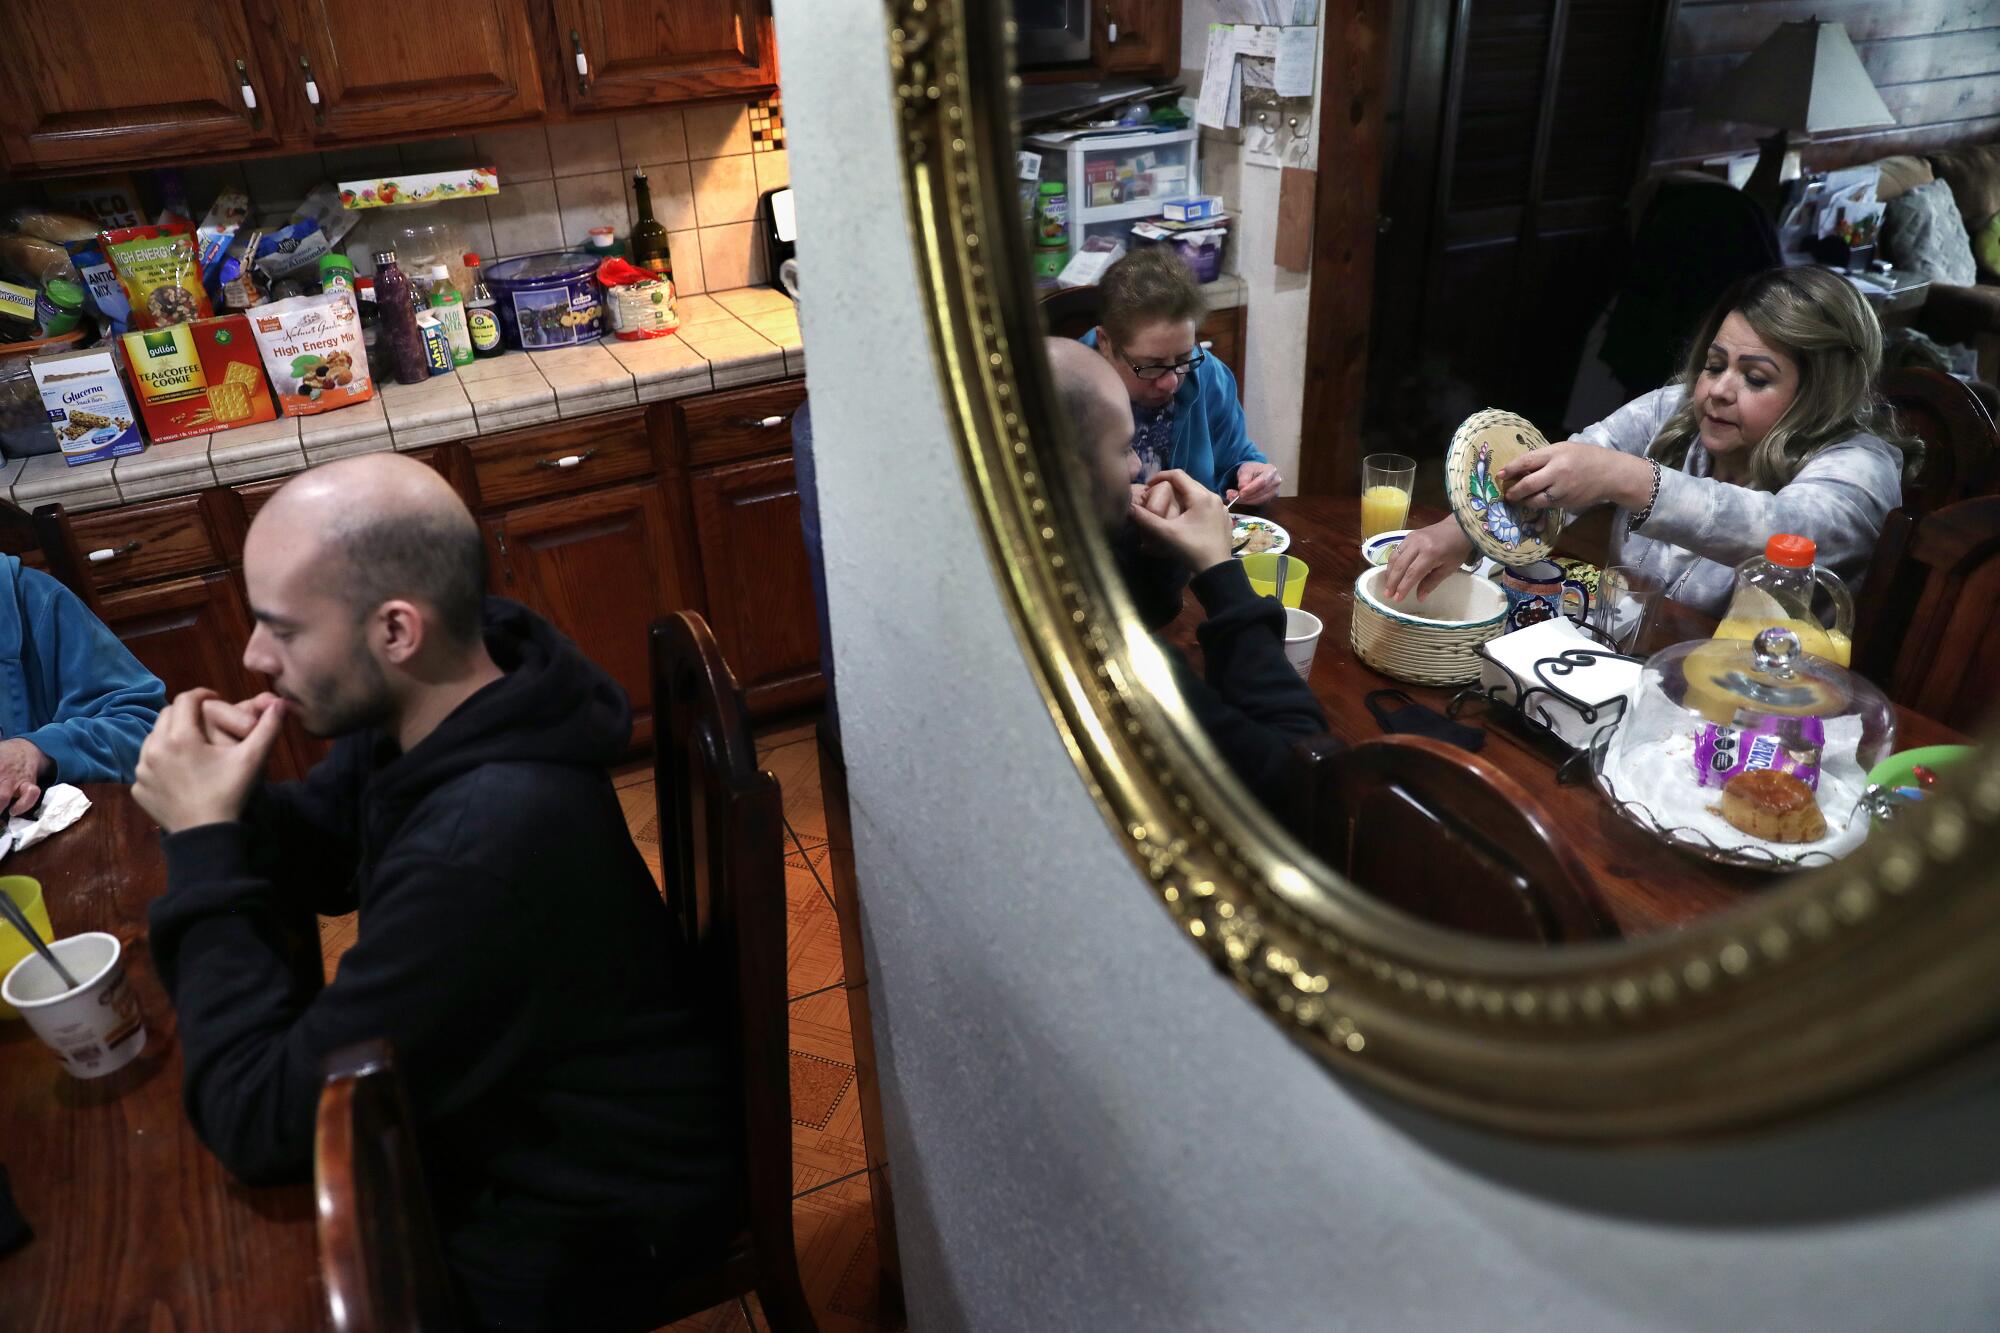  Blanca Lopez, right, eats with her mother Maria Esther Lopez, and son David Muno,  left, at home in Glendale.